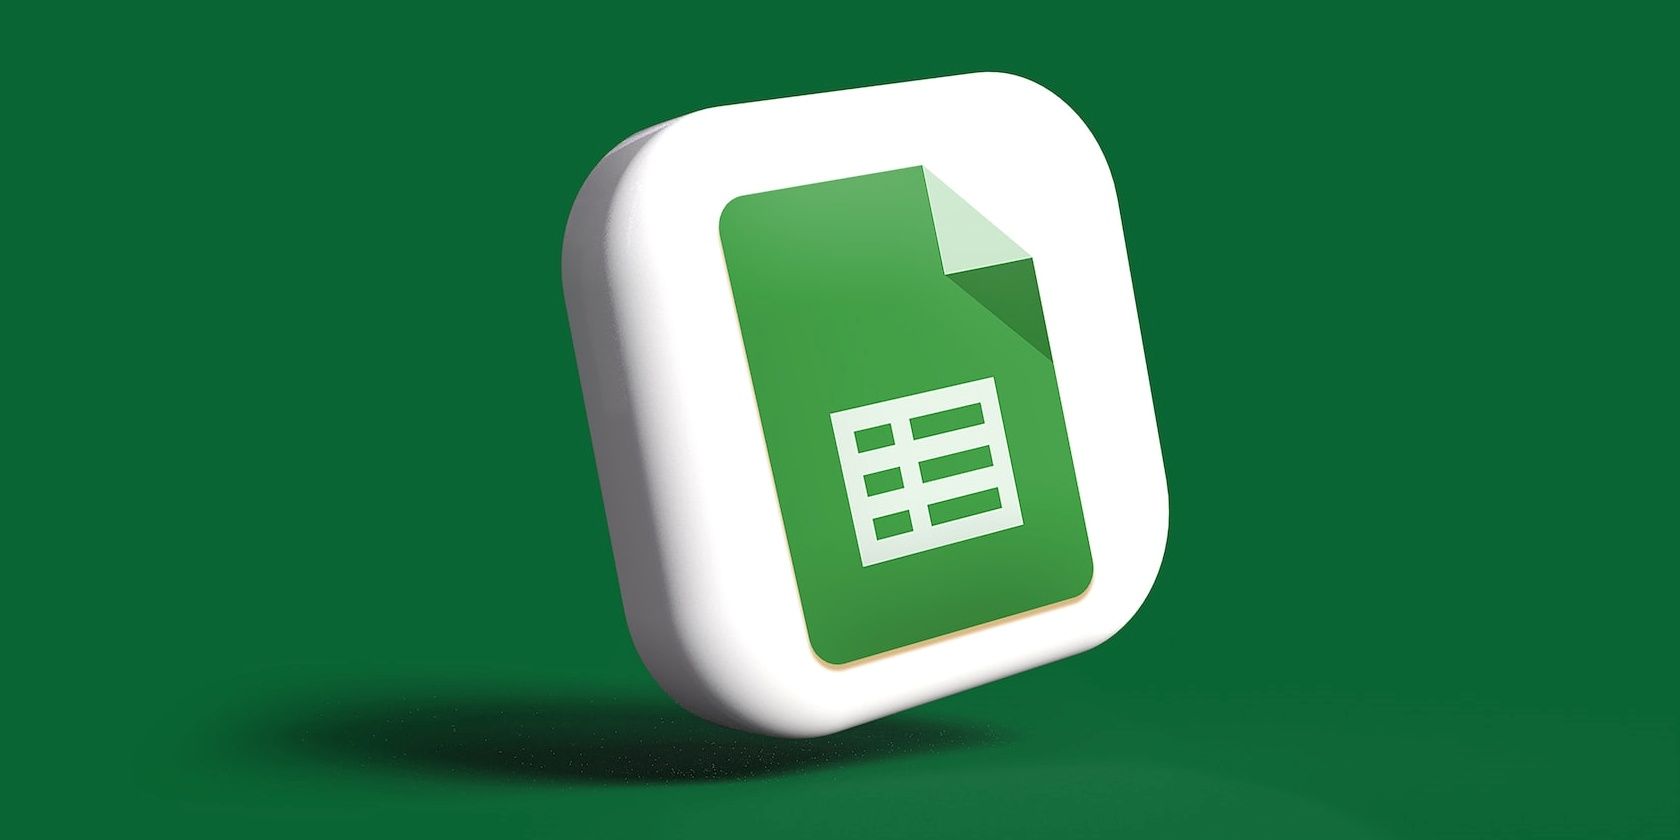 Google Sheets Logo on a green background